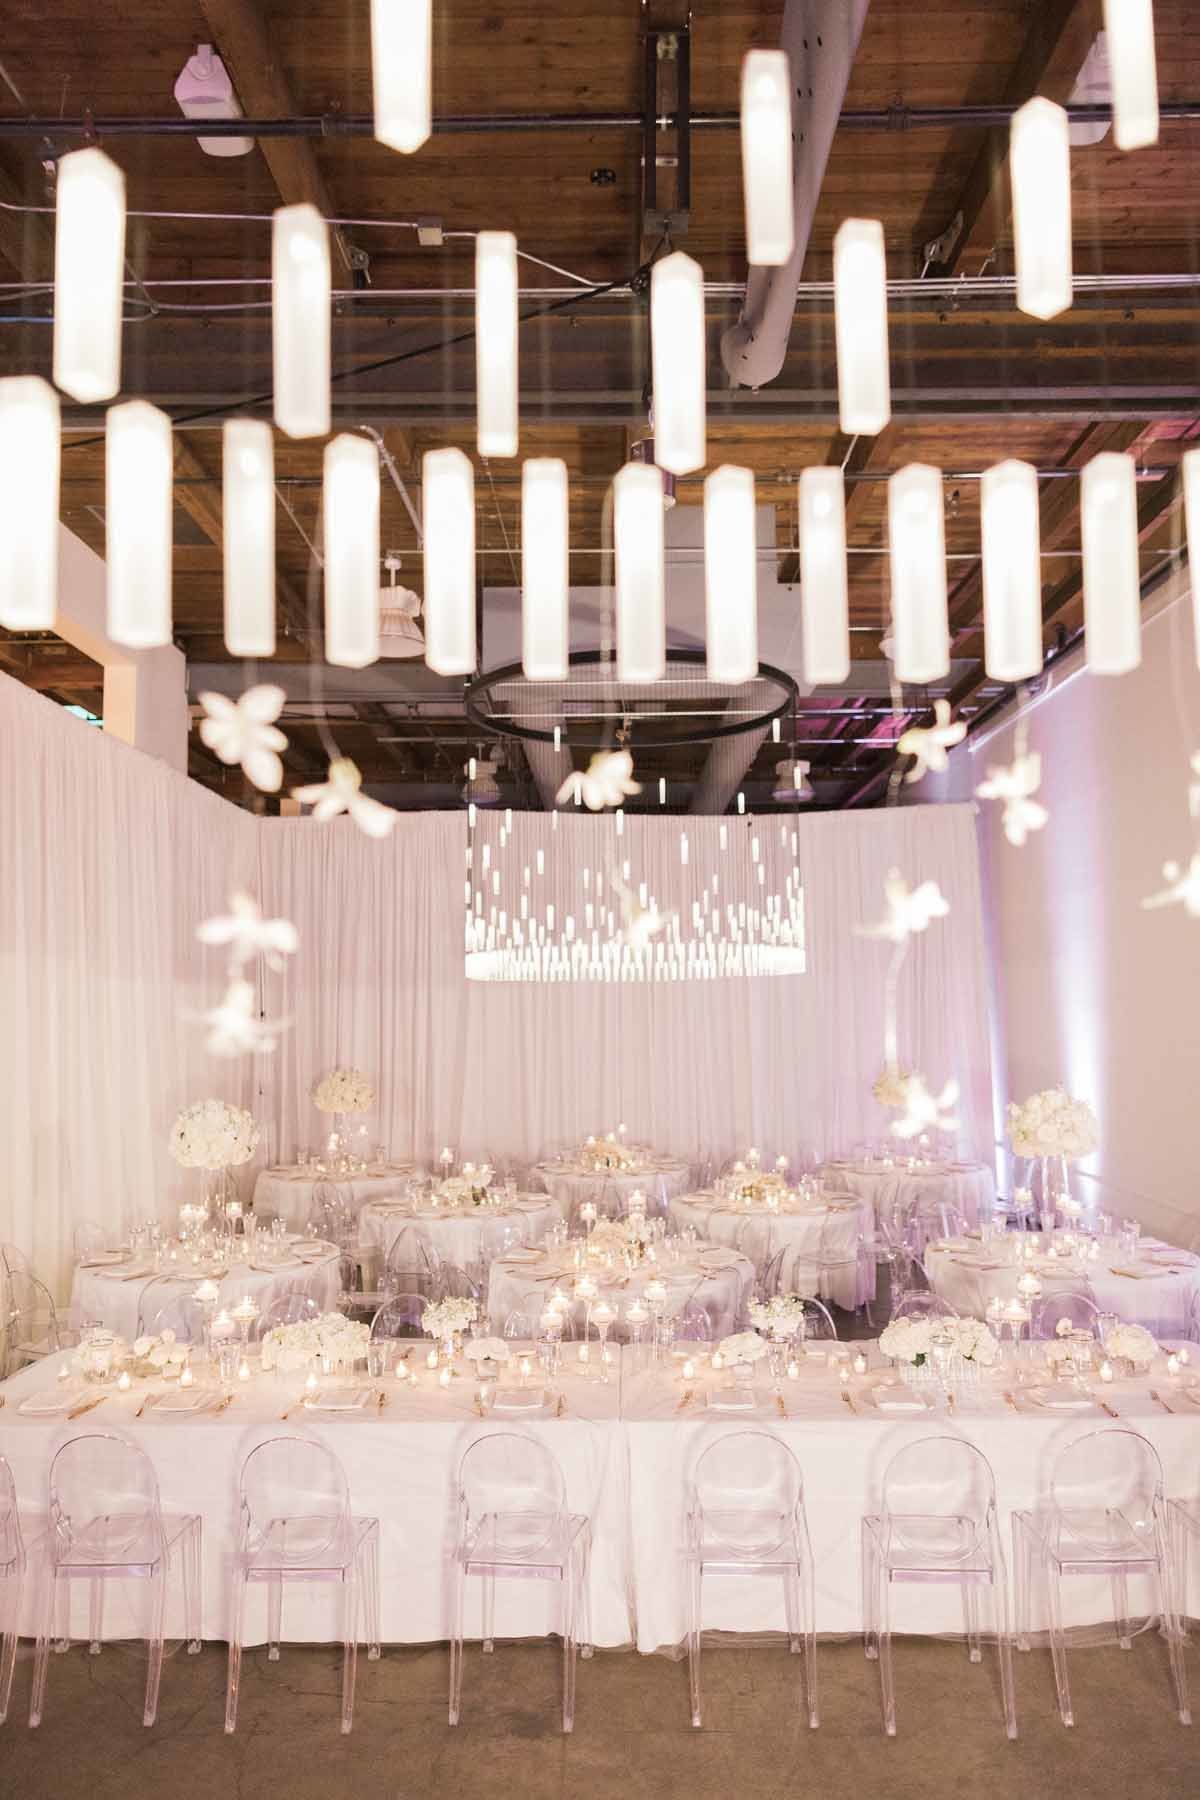 Chandelier with delicate white orchids hanging from it suspended over head table